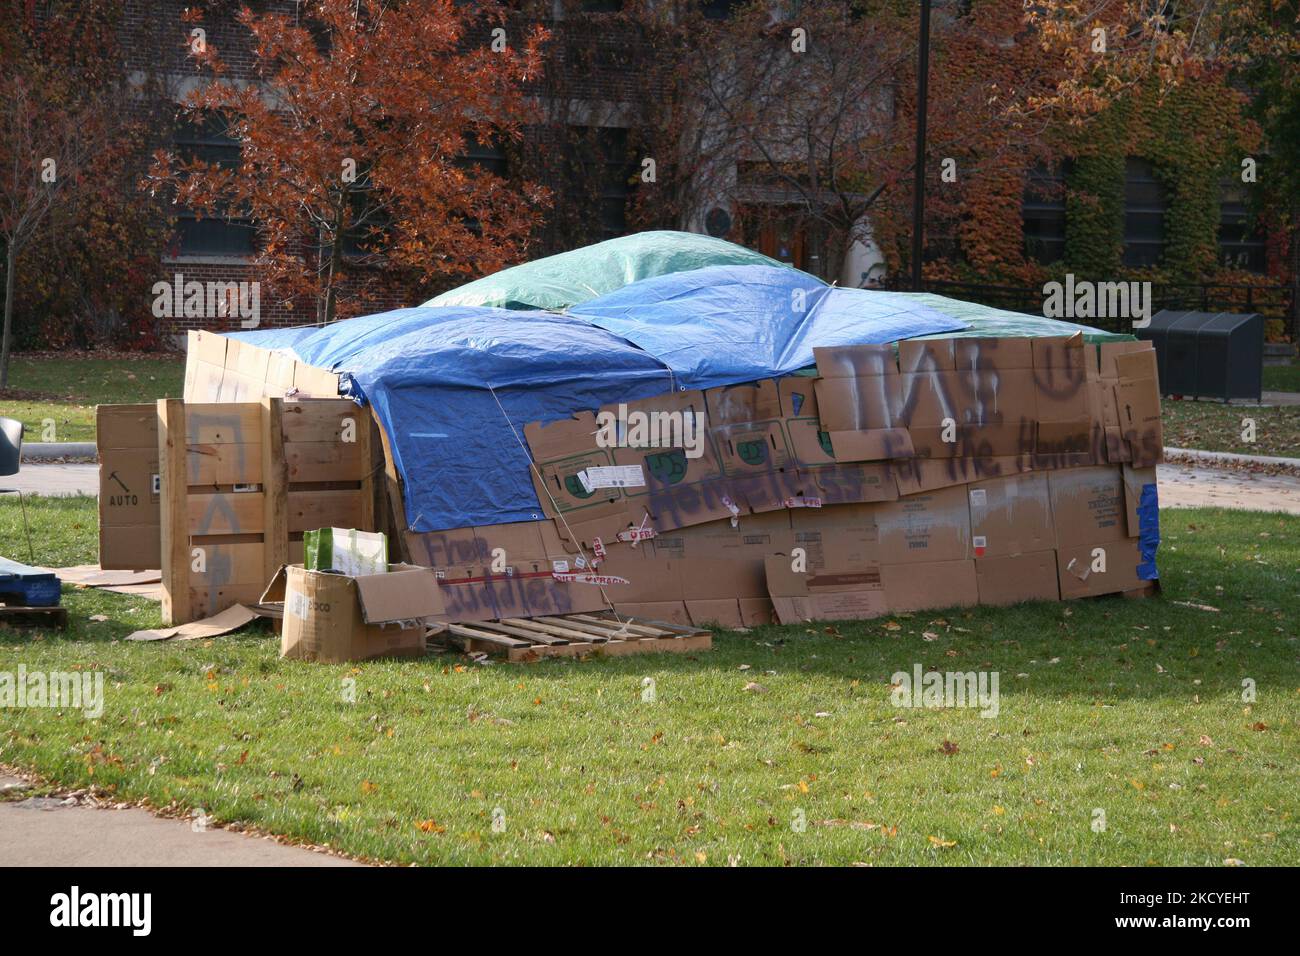 University of Windsor freshmen students pledging to a fraternity slept in a tent consisting of cardboard and plastic to show their loyalty and to help raise money for homelessness during the cold Autumn evenings in Windsor, Ontario, Canada. (Photo by Creative Touch Imaging Ltd./NurPhoto) Stock Photo